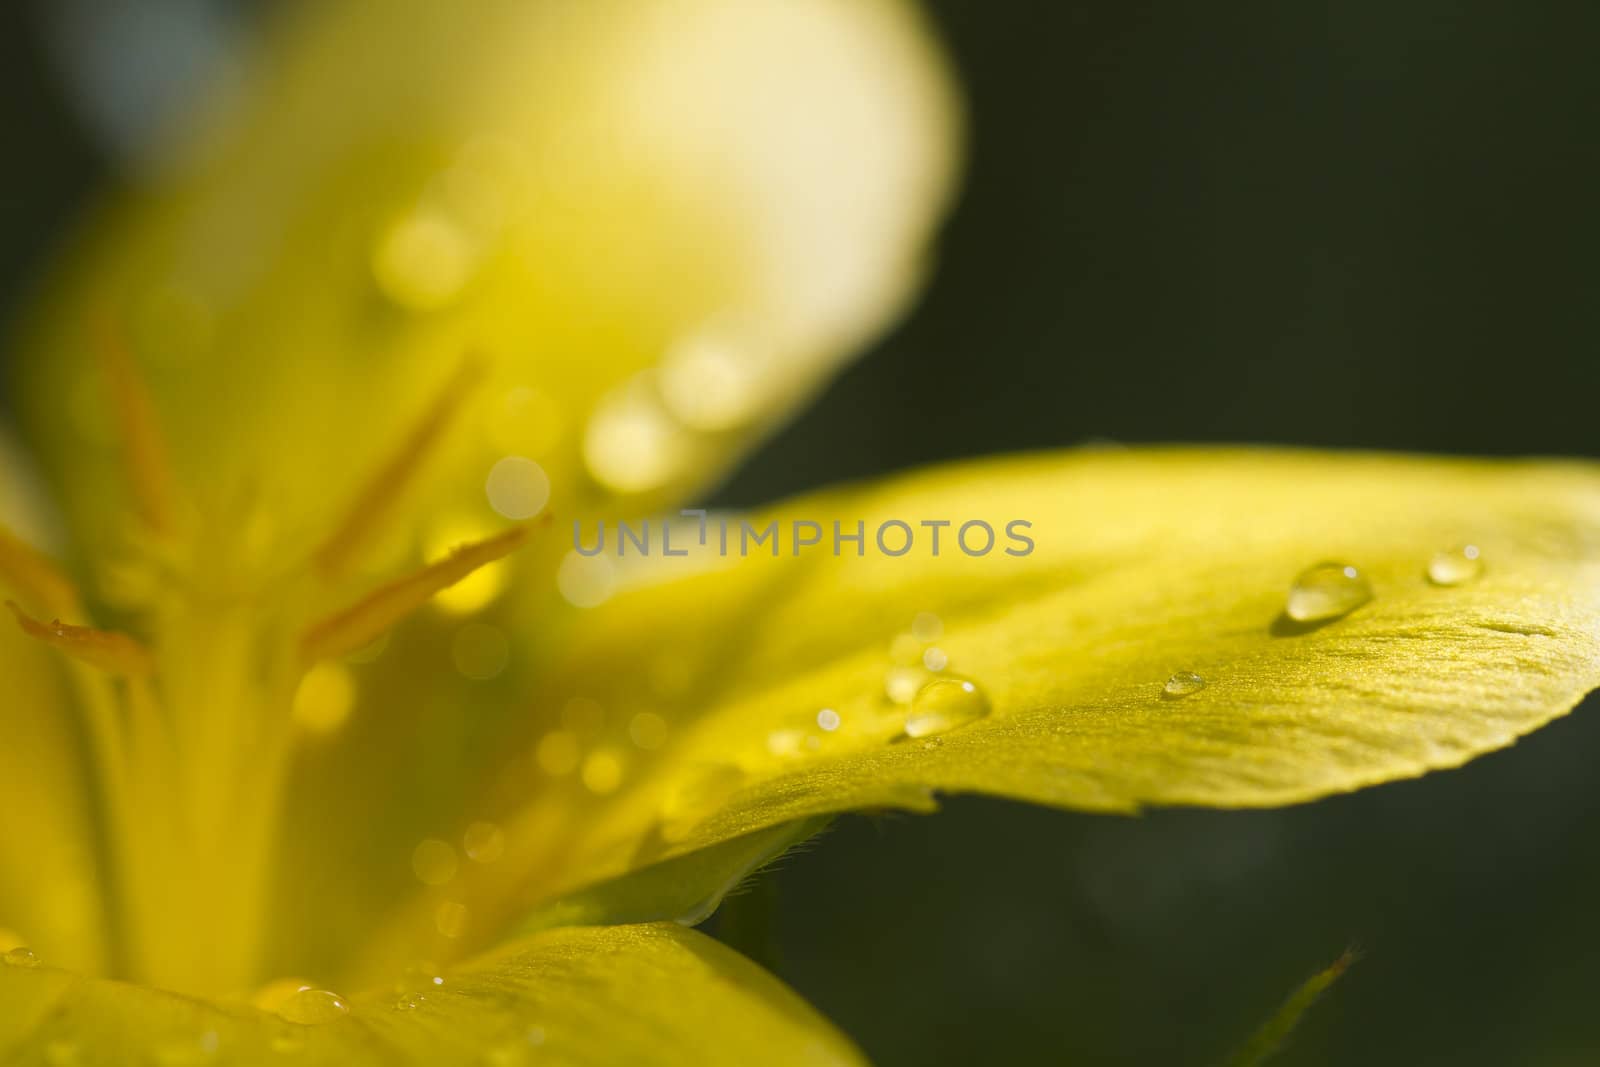 close up view of water droplets on a yellow flower petals with sun ray and dark background